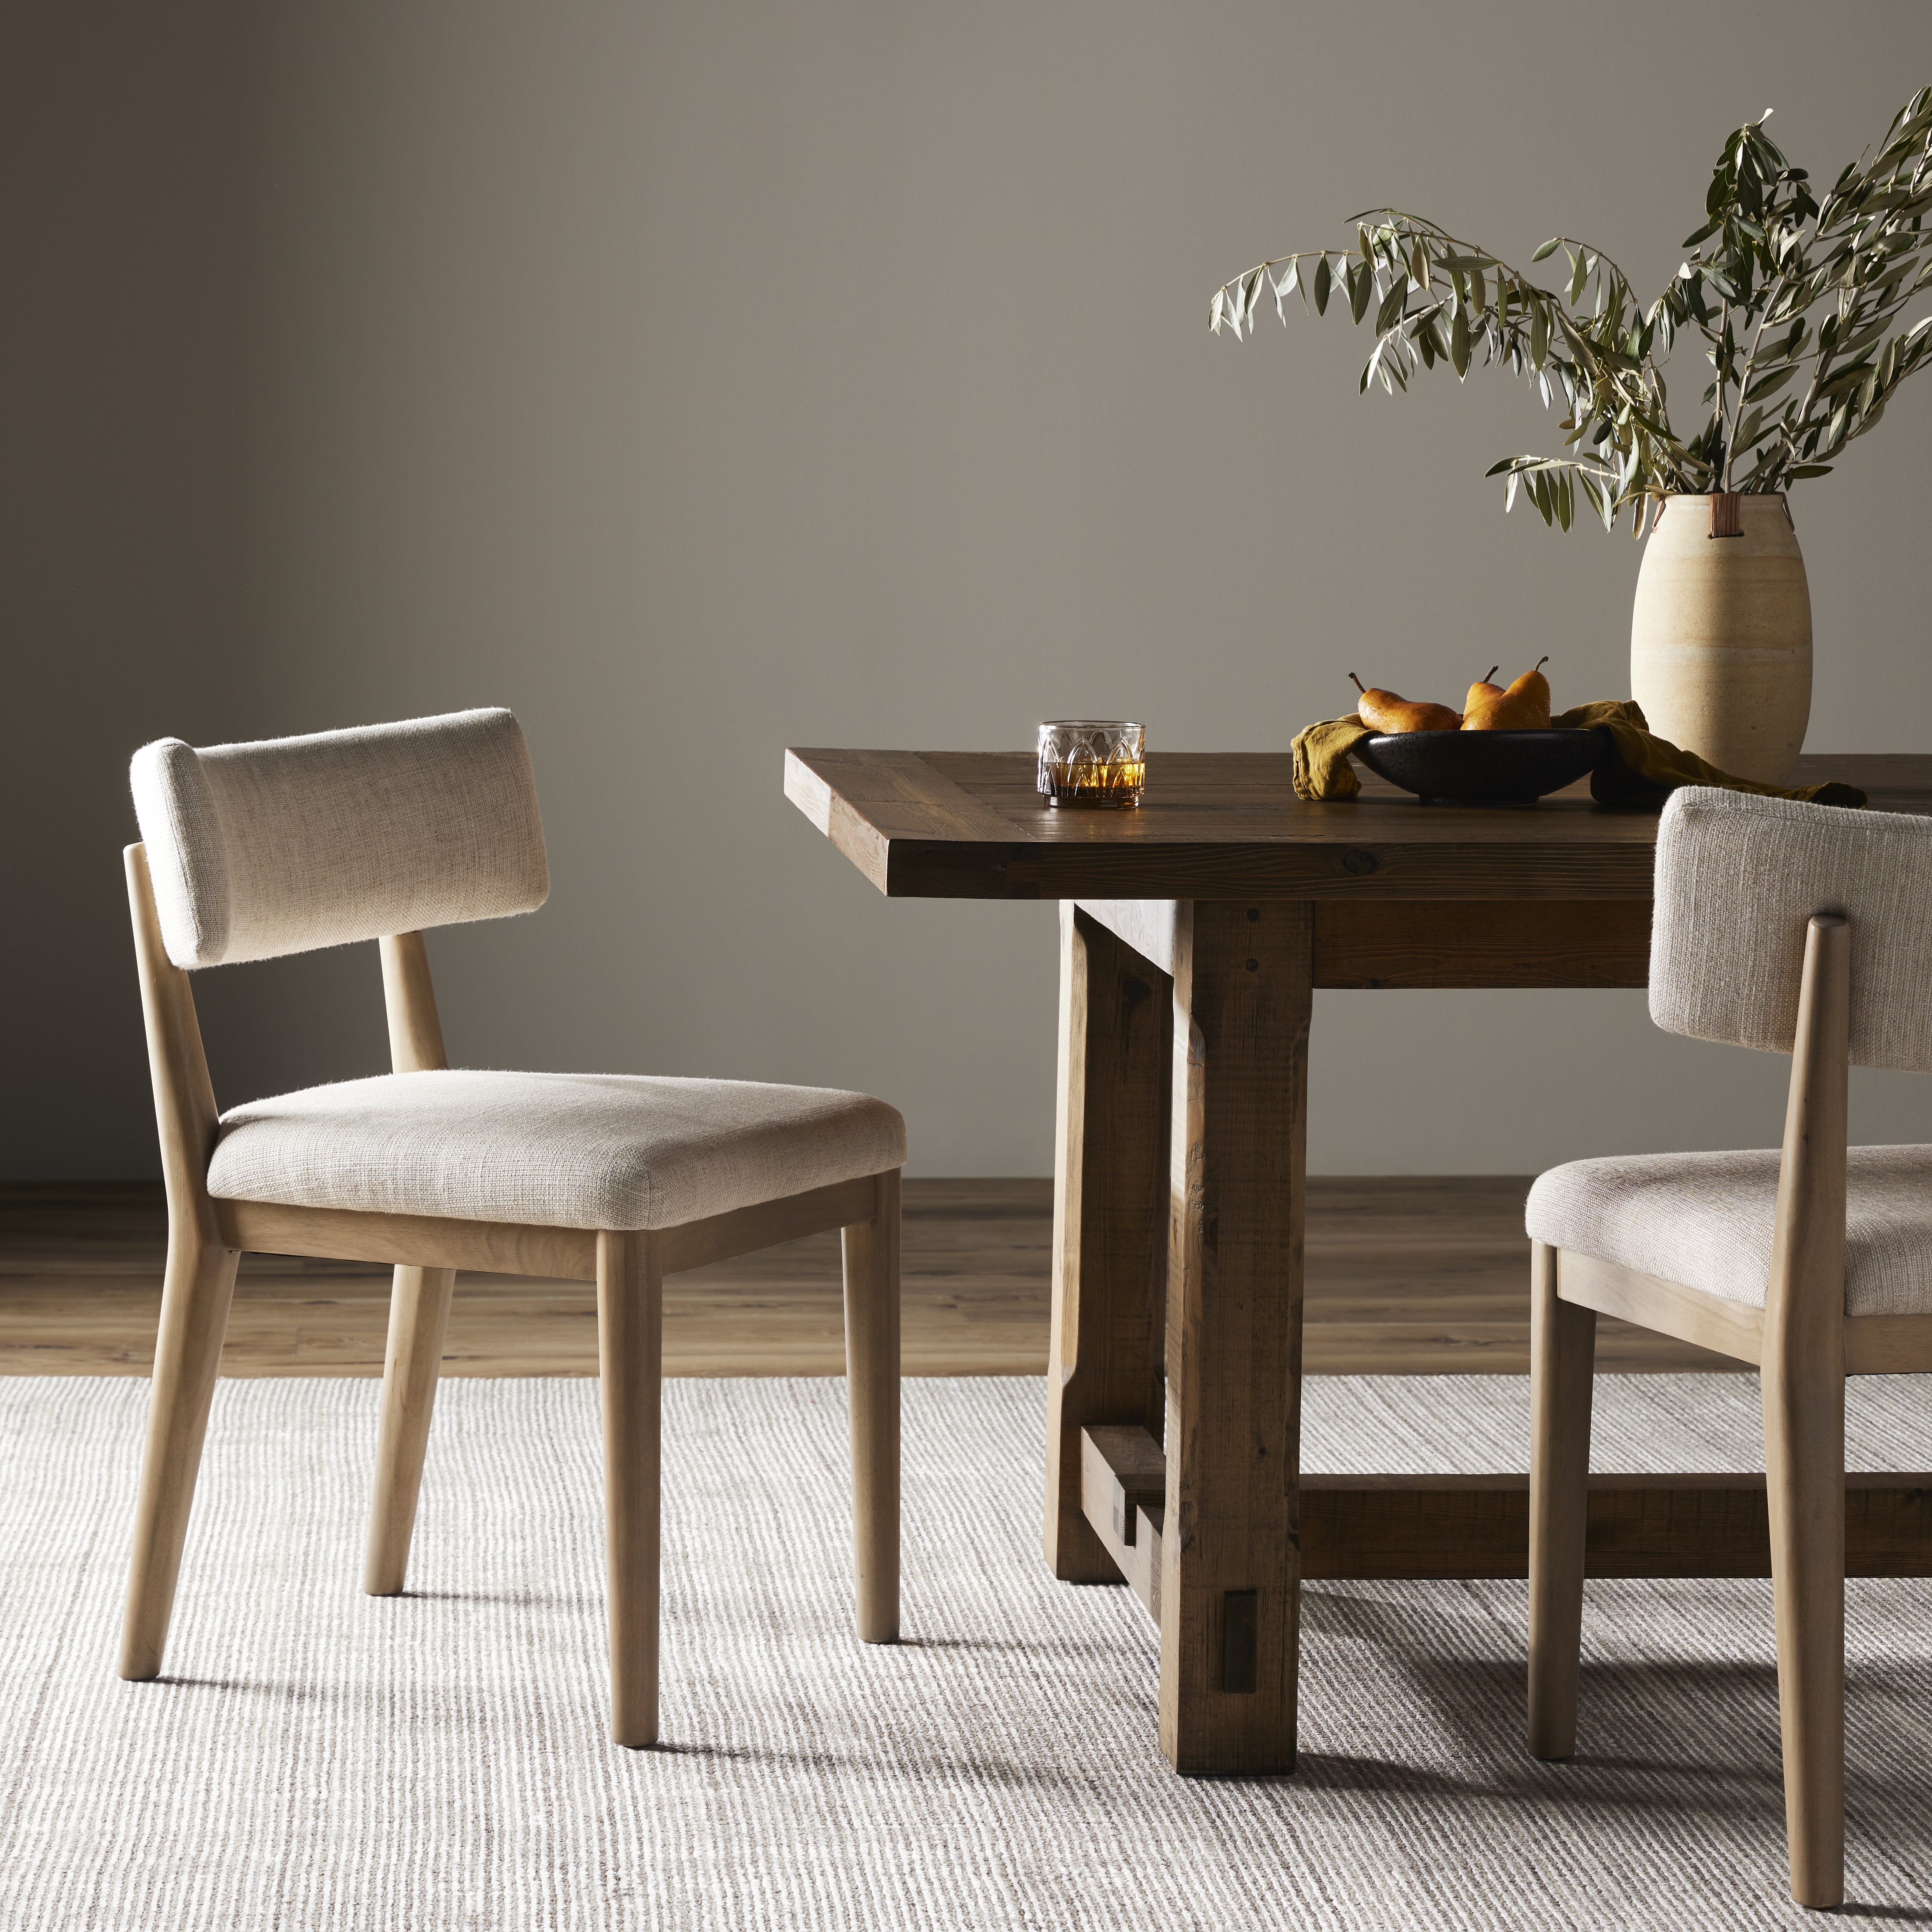 Cardell Dining Chair-Essence Natural - Image 11